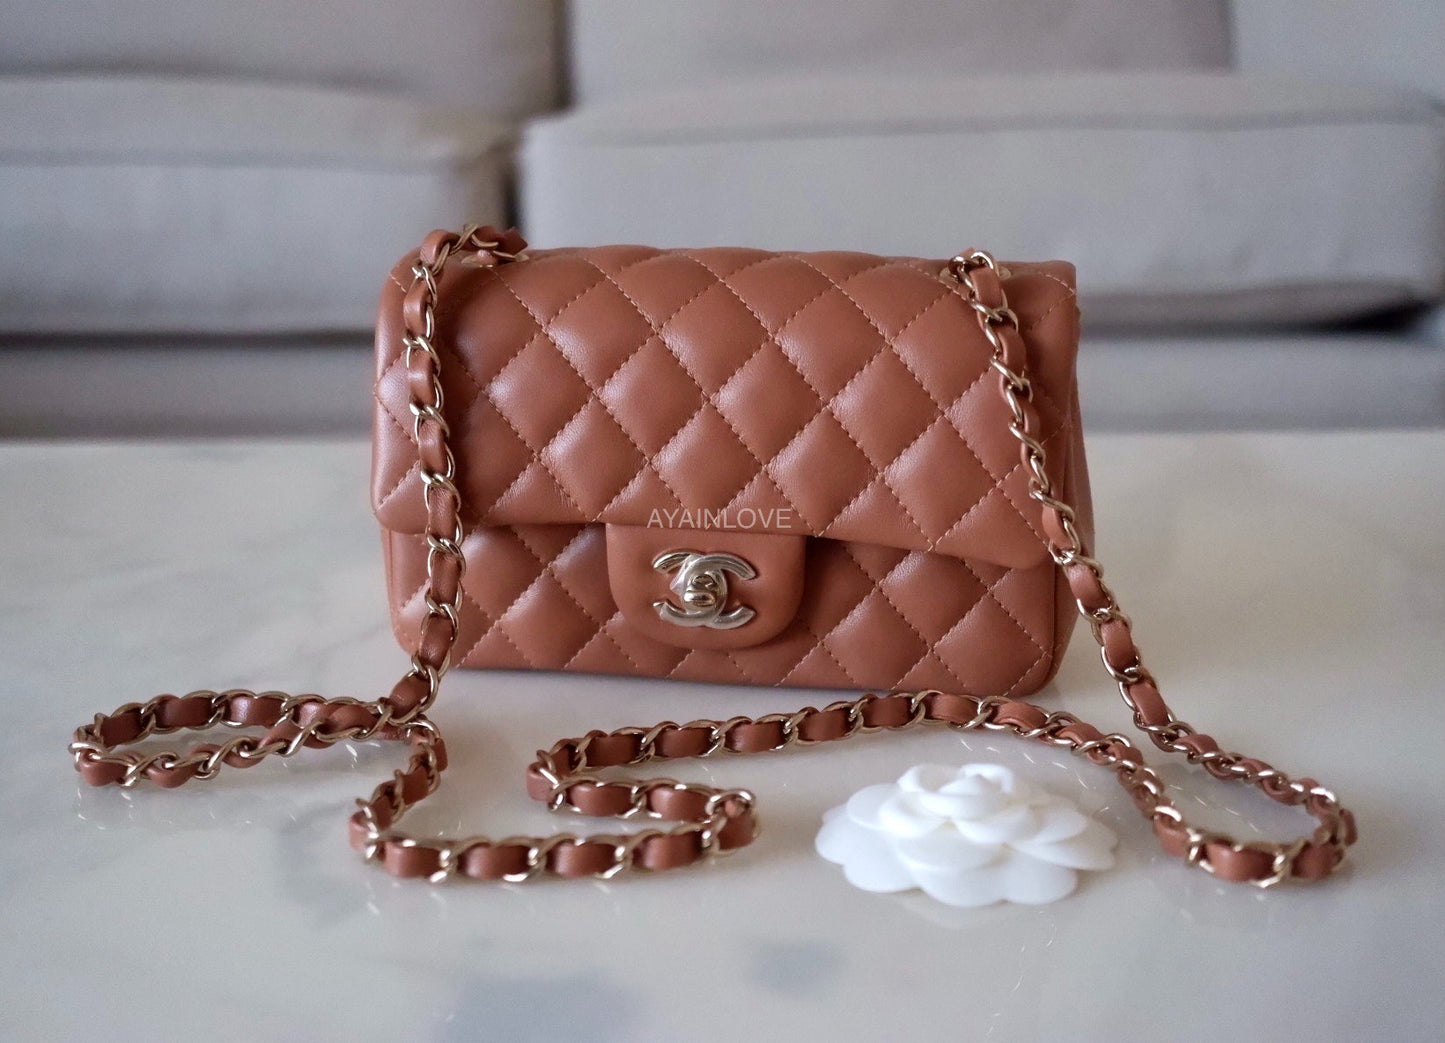 Take a look at some of the features of the Chanel 21P caramel mini bag